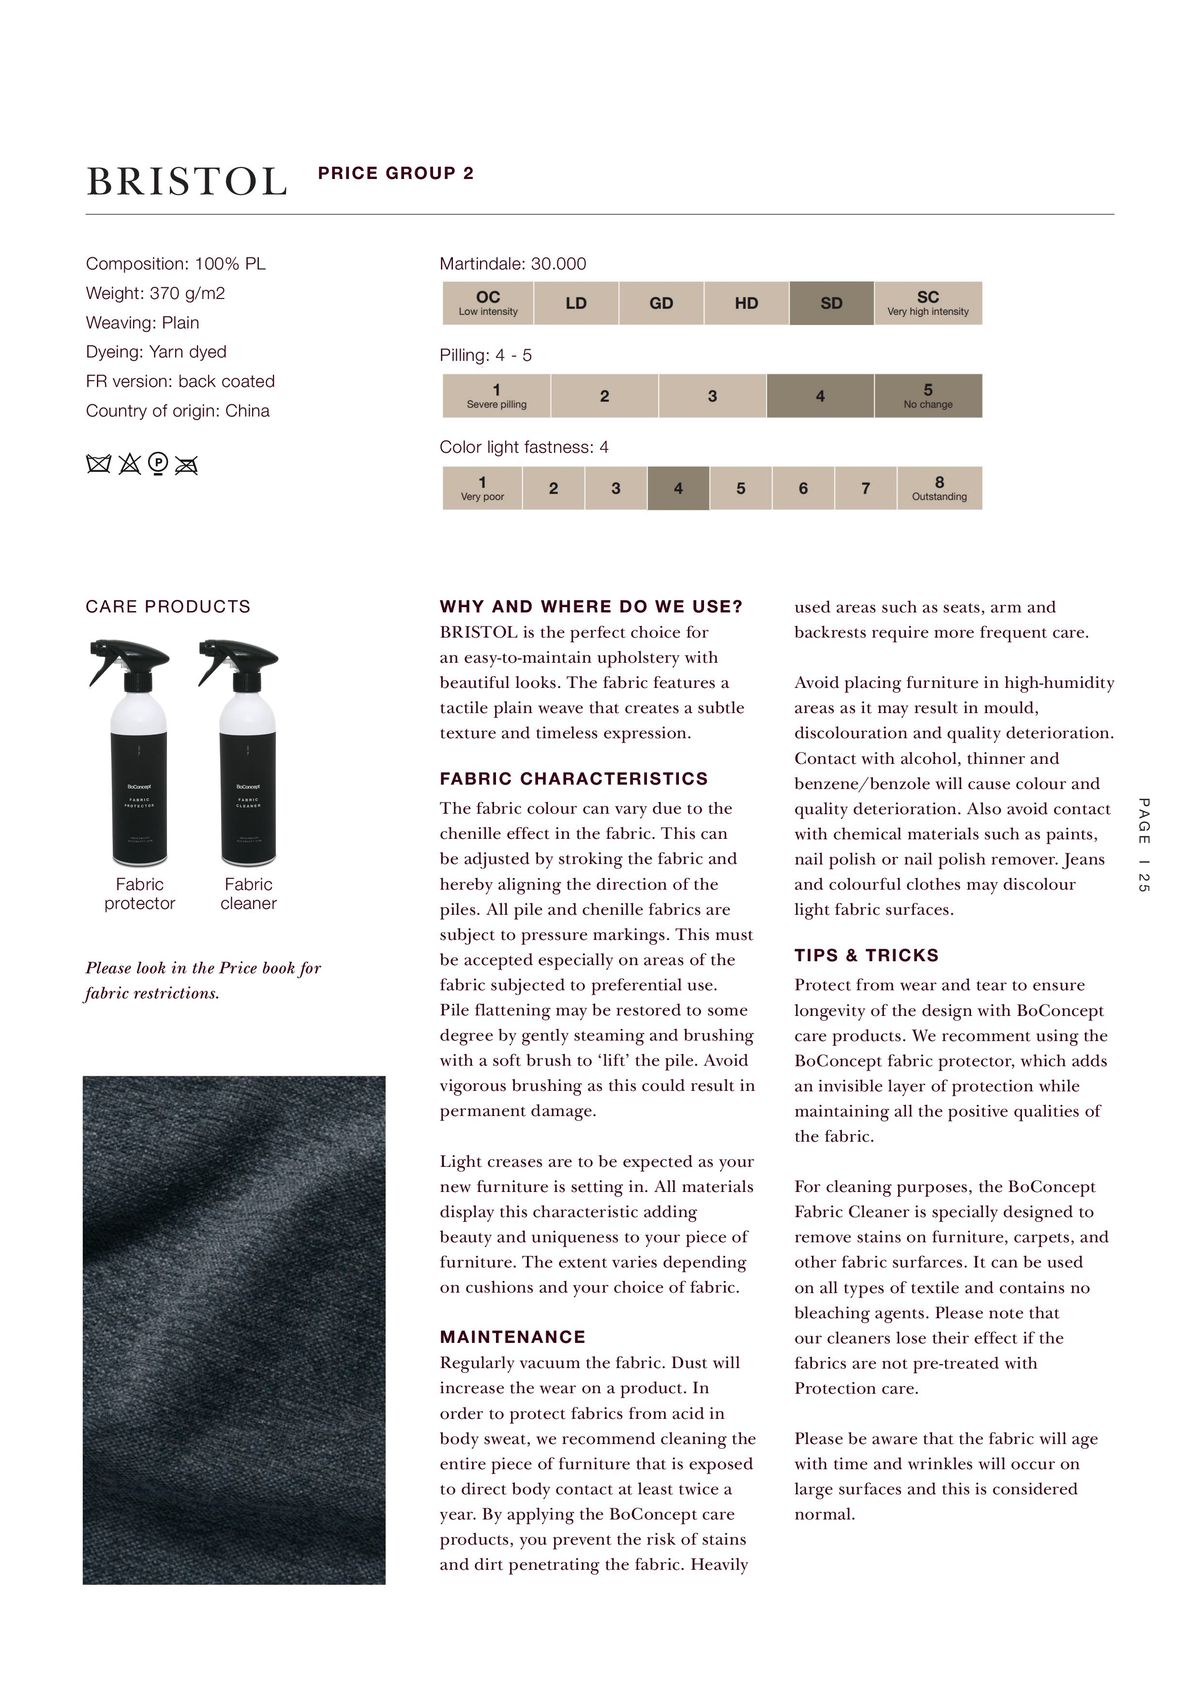 Catalogue Explore our contract materials guide, page 00025